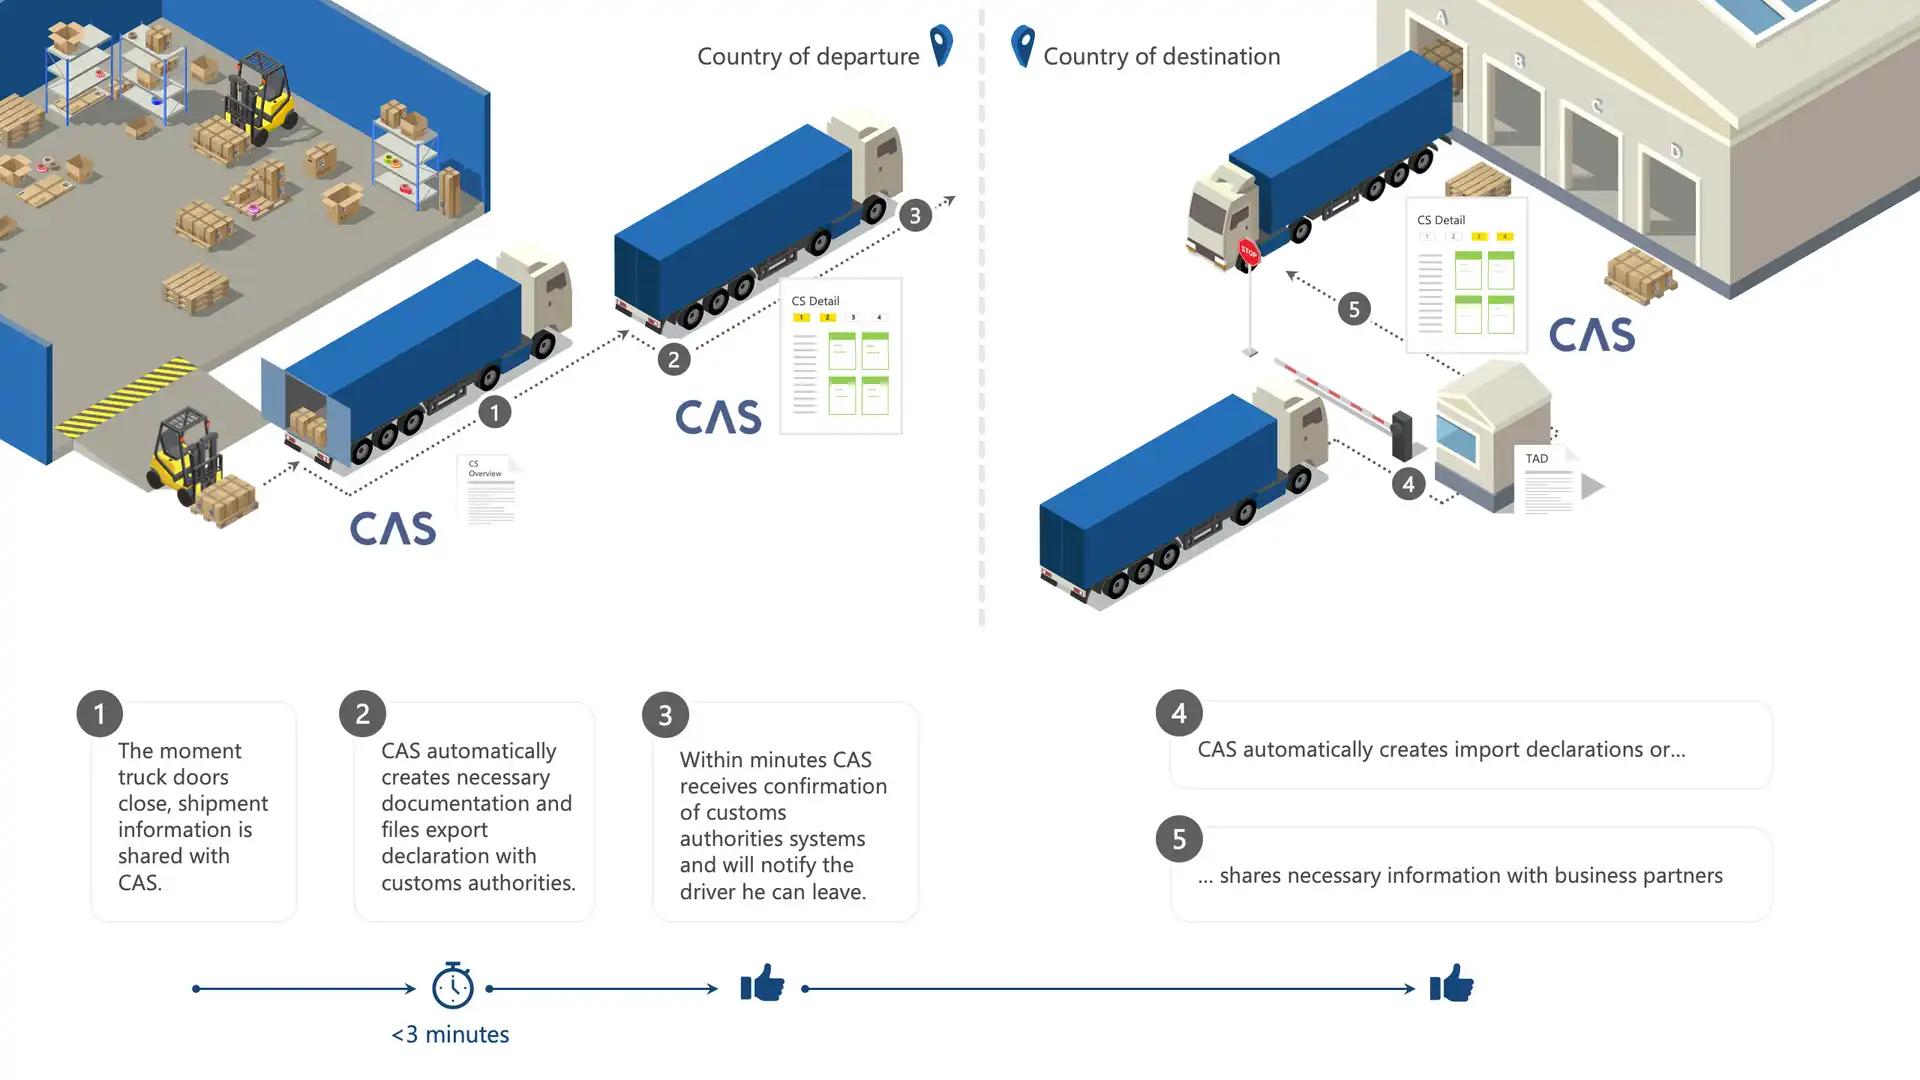 Infographic about the organisation of transportation in the port of Antwerp